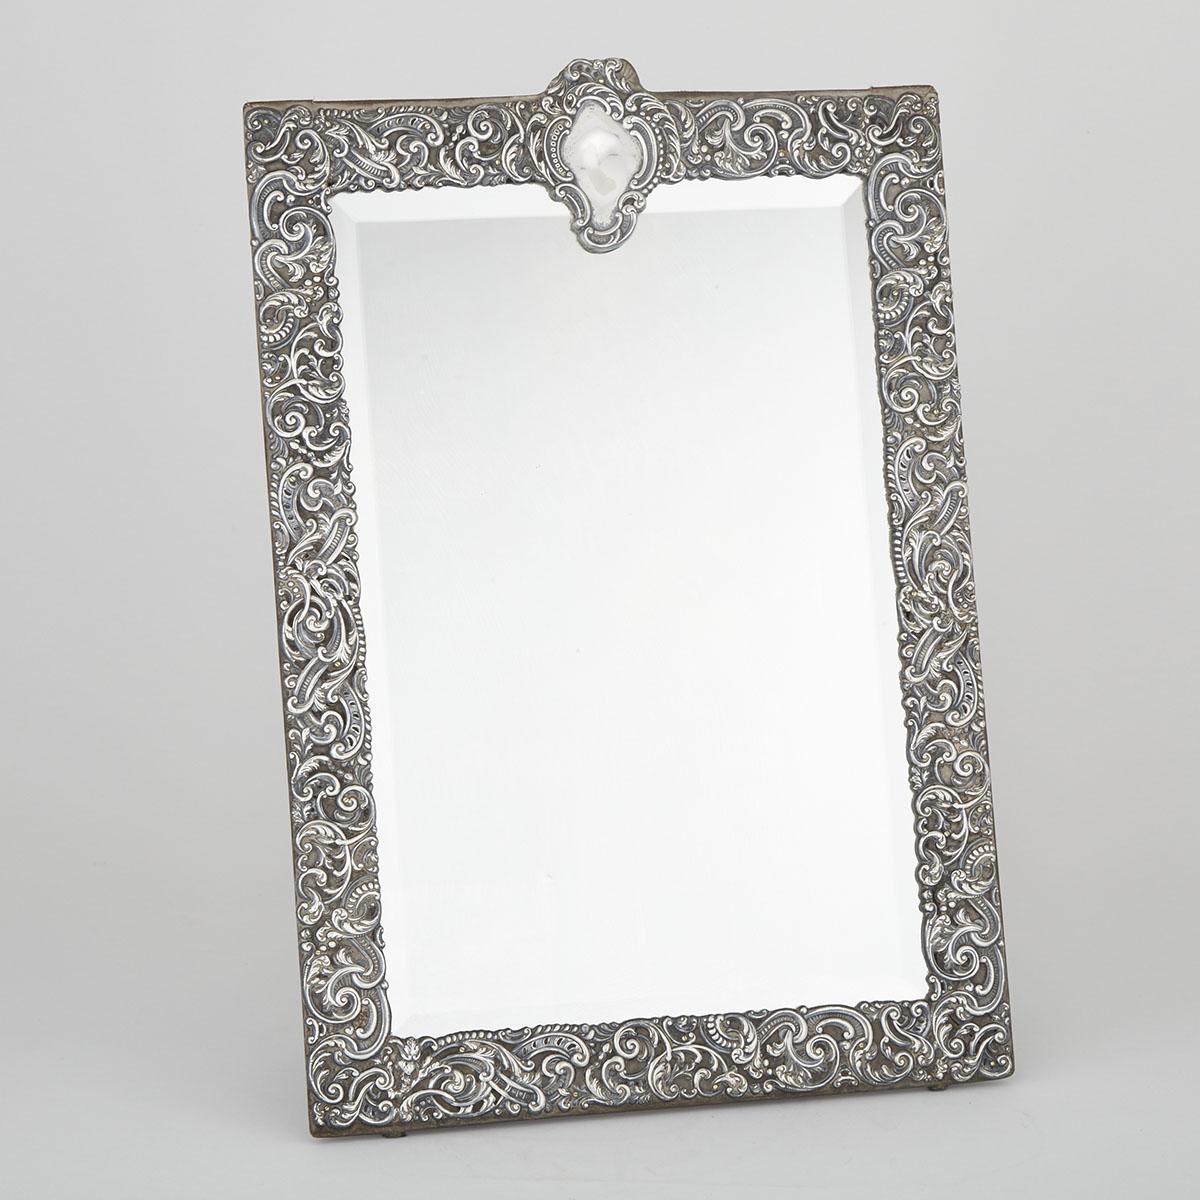 LATE VICTORIAN SILVER FRAMED WALL MIRROR, GOLDSMITHS & SILVERSMITHS CO., LONDON, 1900with